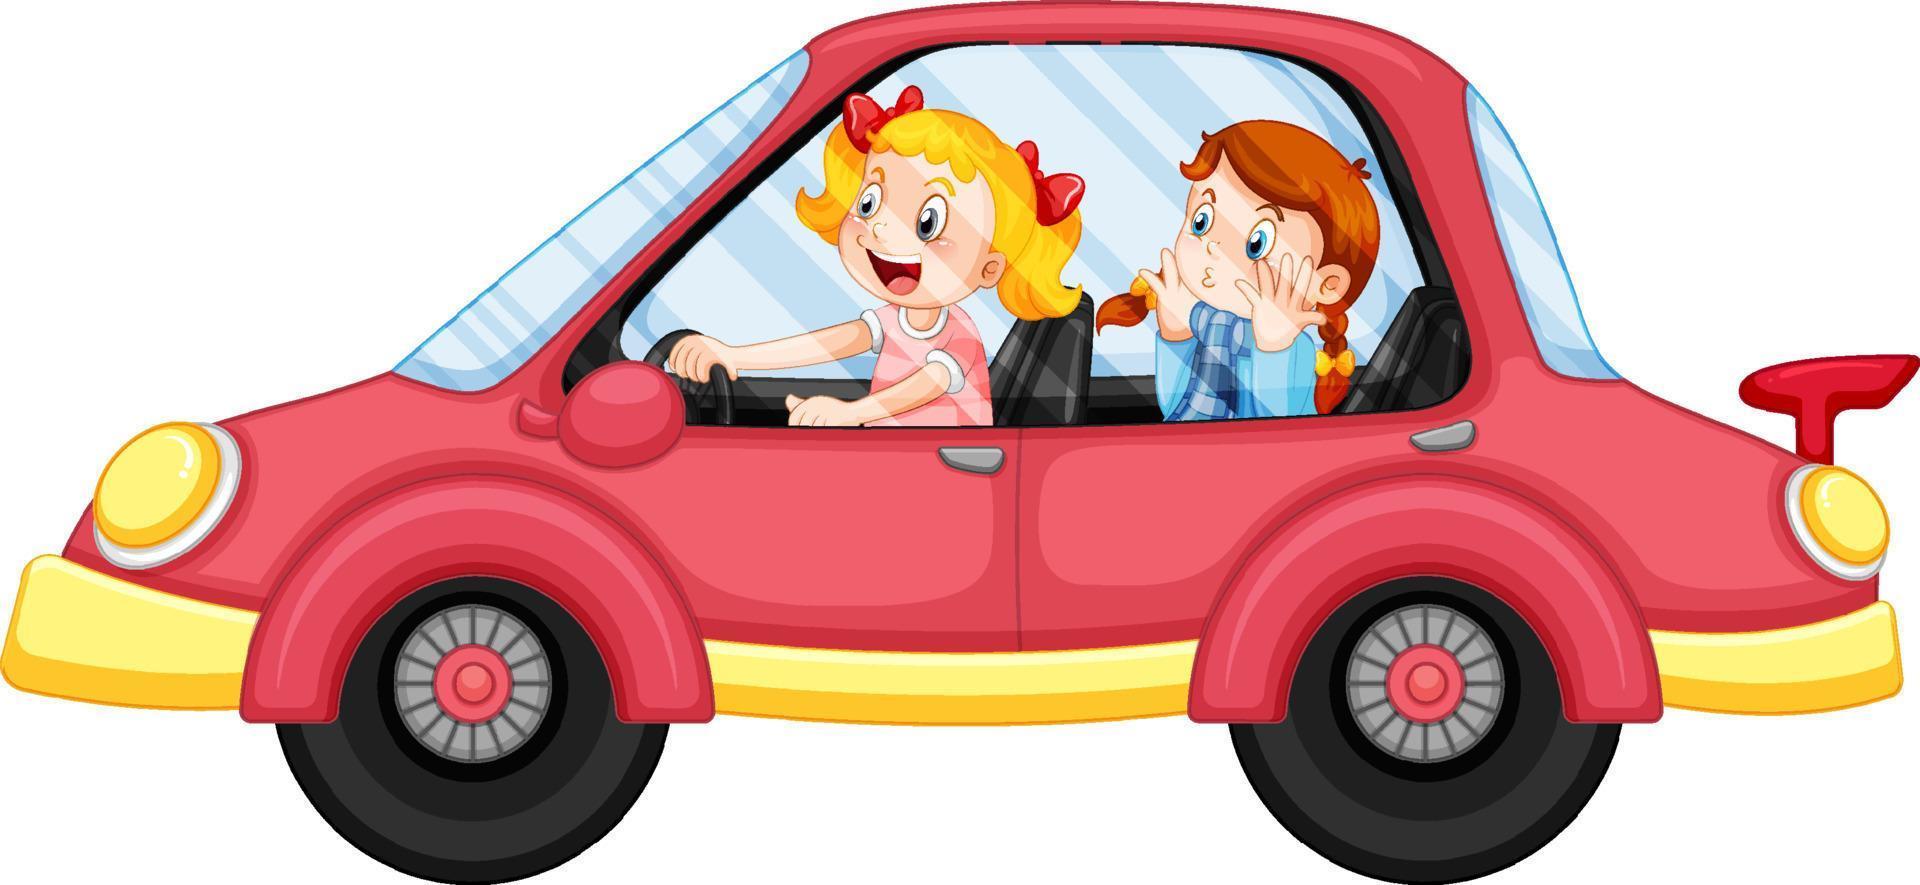 Kids in a red car in cartoon style vector